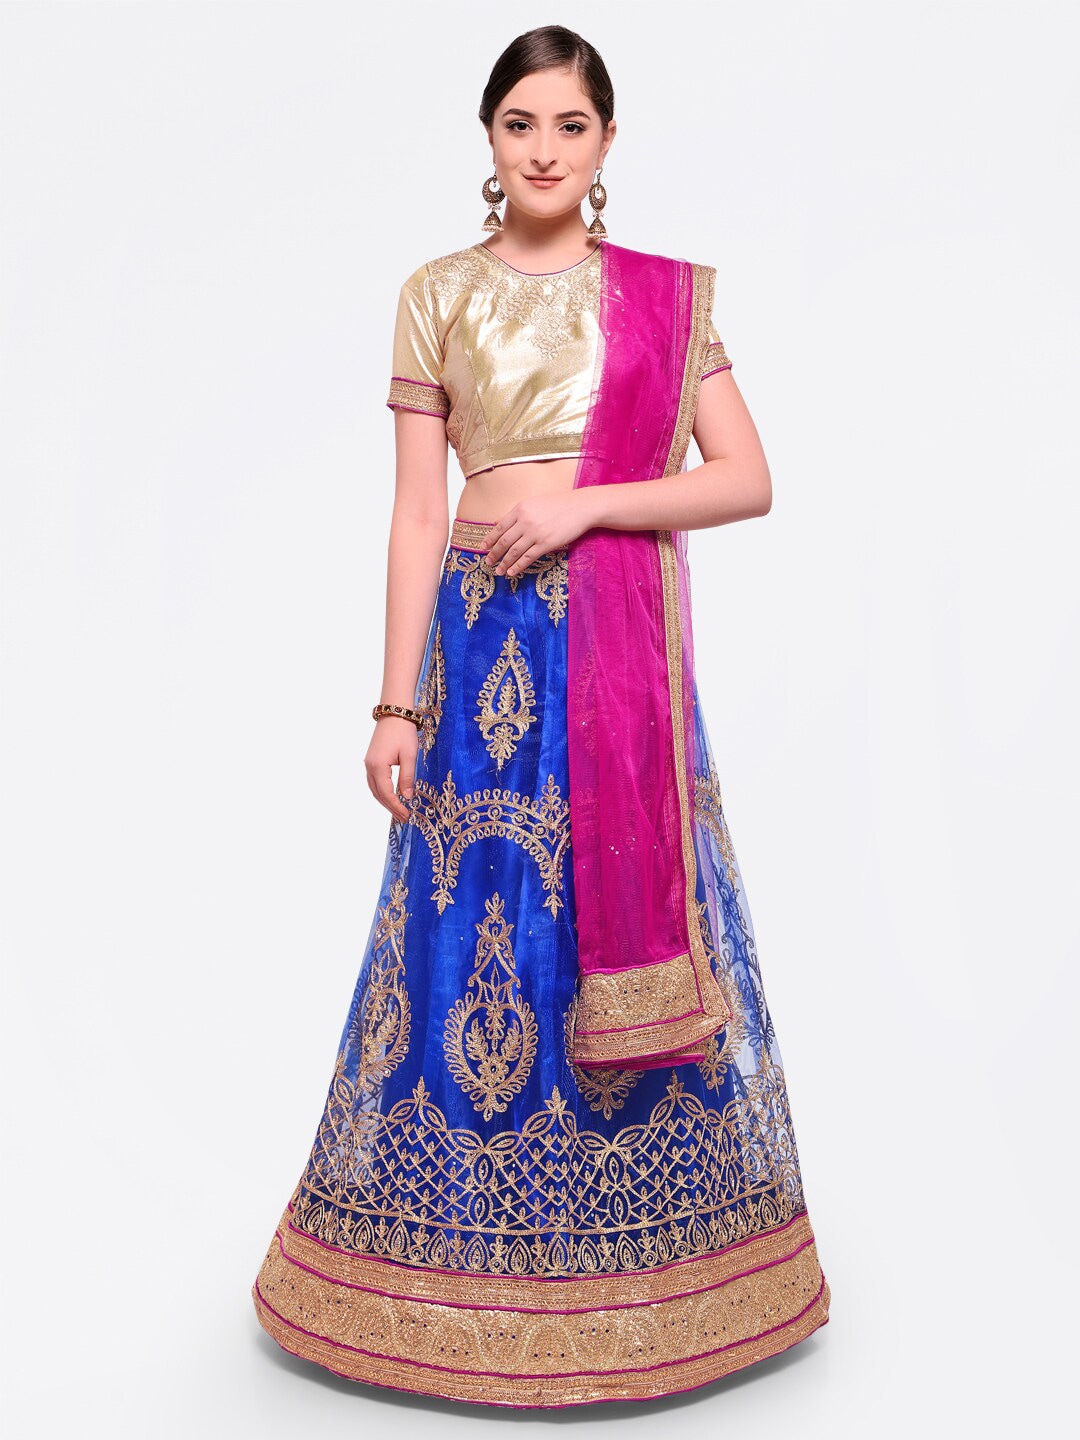 MANVAA Blue & Pink Embroidered Semi-Stitched Lehenga & Unstitched Blouse With Dupatta Price in India